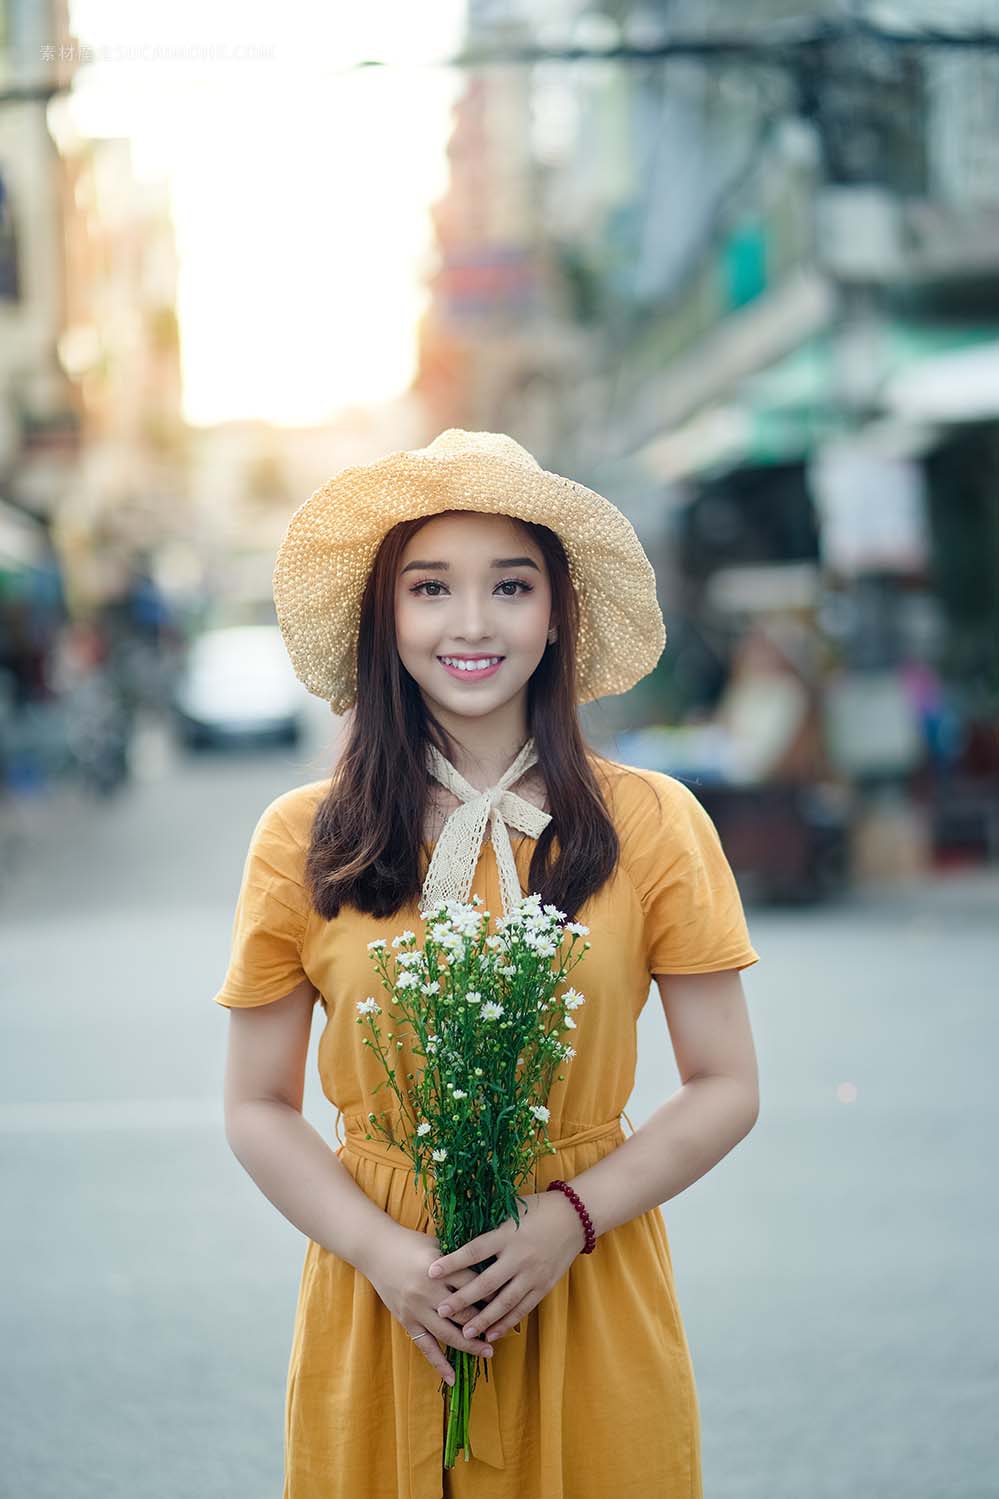 selective-focus-photography-of-woman-holding-flowers拿着鲜花的美少女